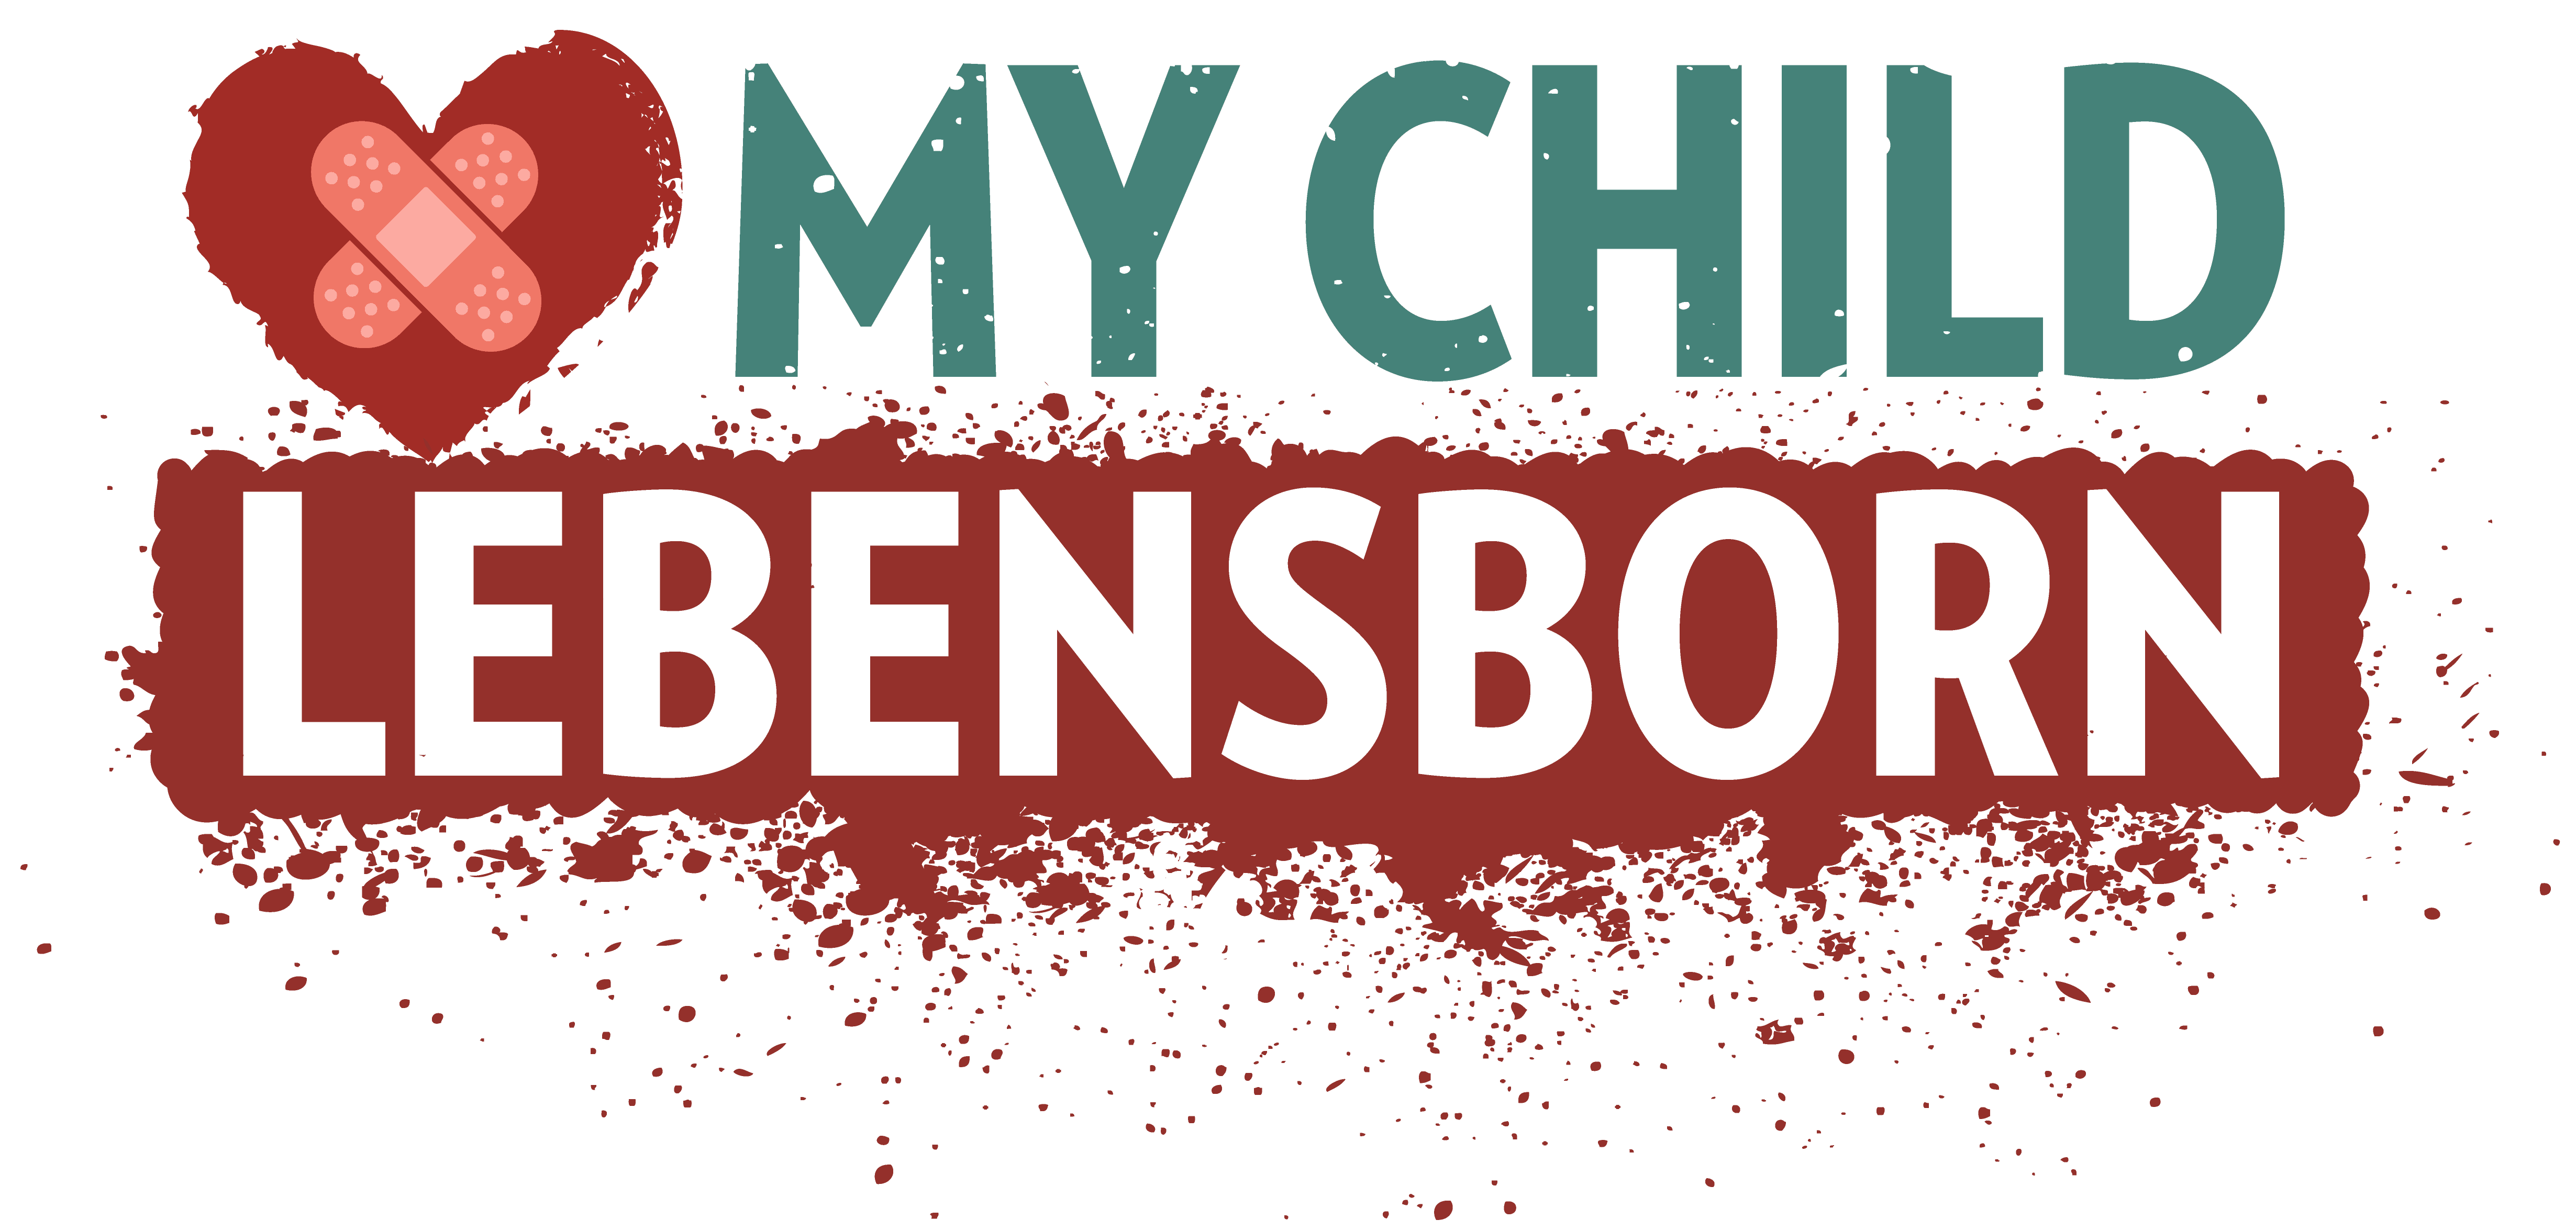 My Child Lebensborn PS4 Version Full Game Free Download